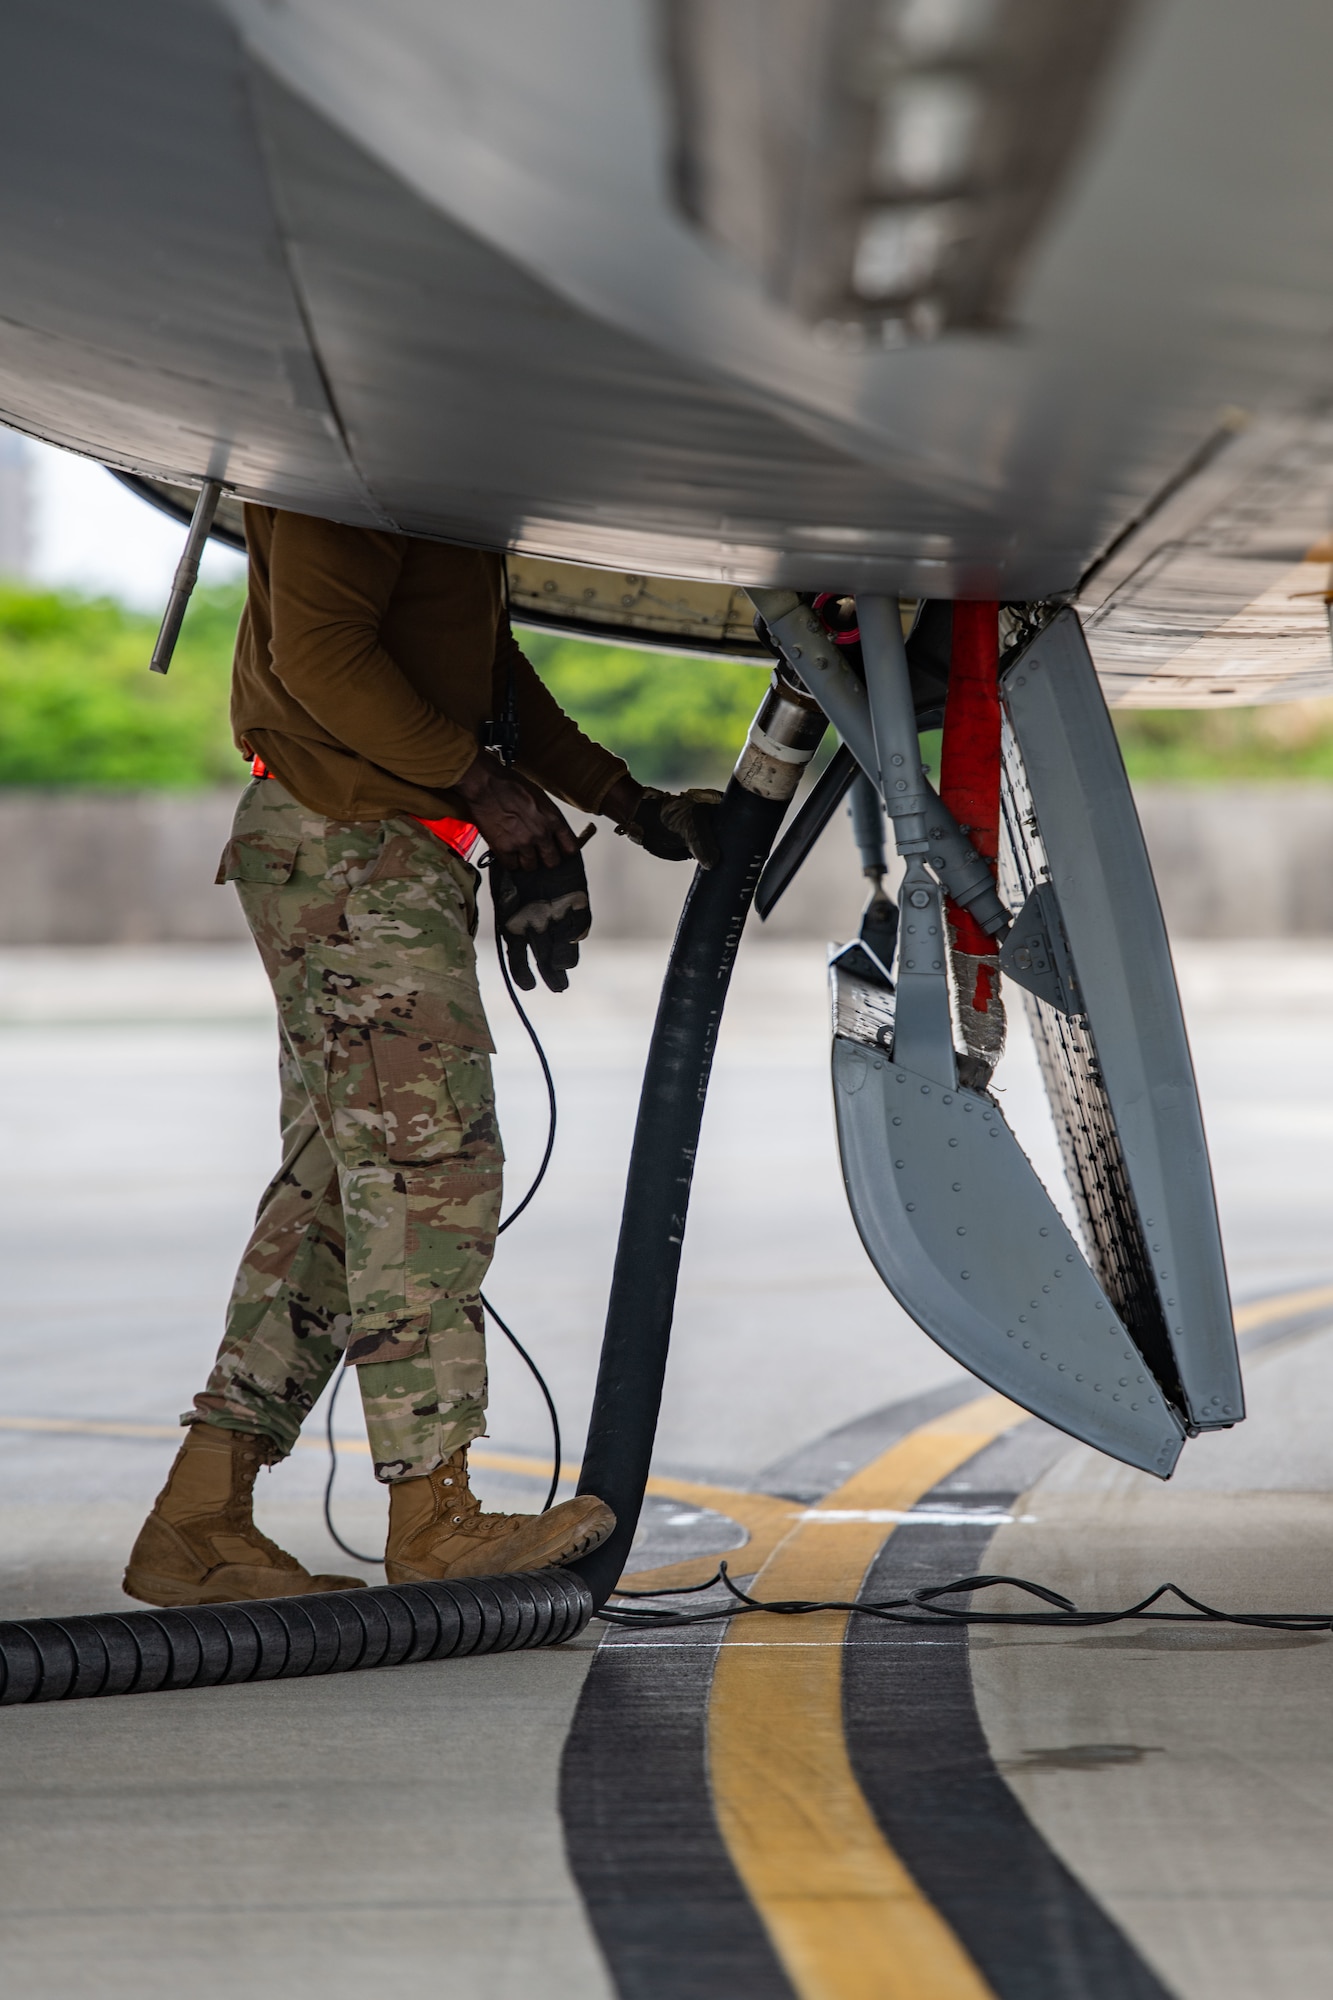 An airman gets ready to disconnect a fuel hose from a plane